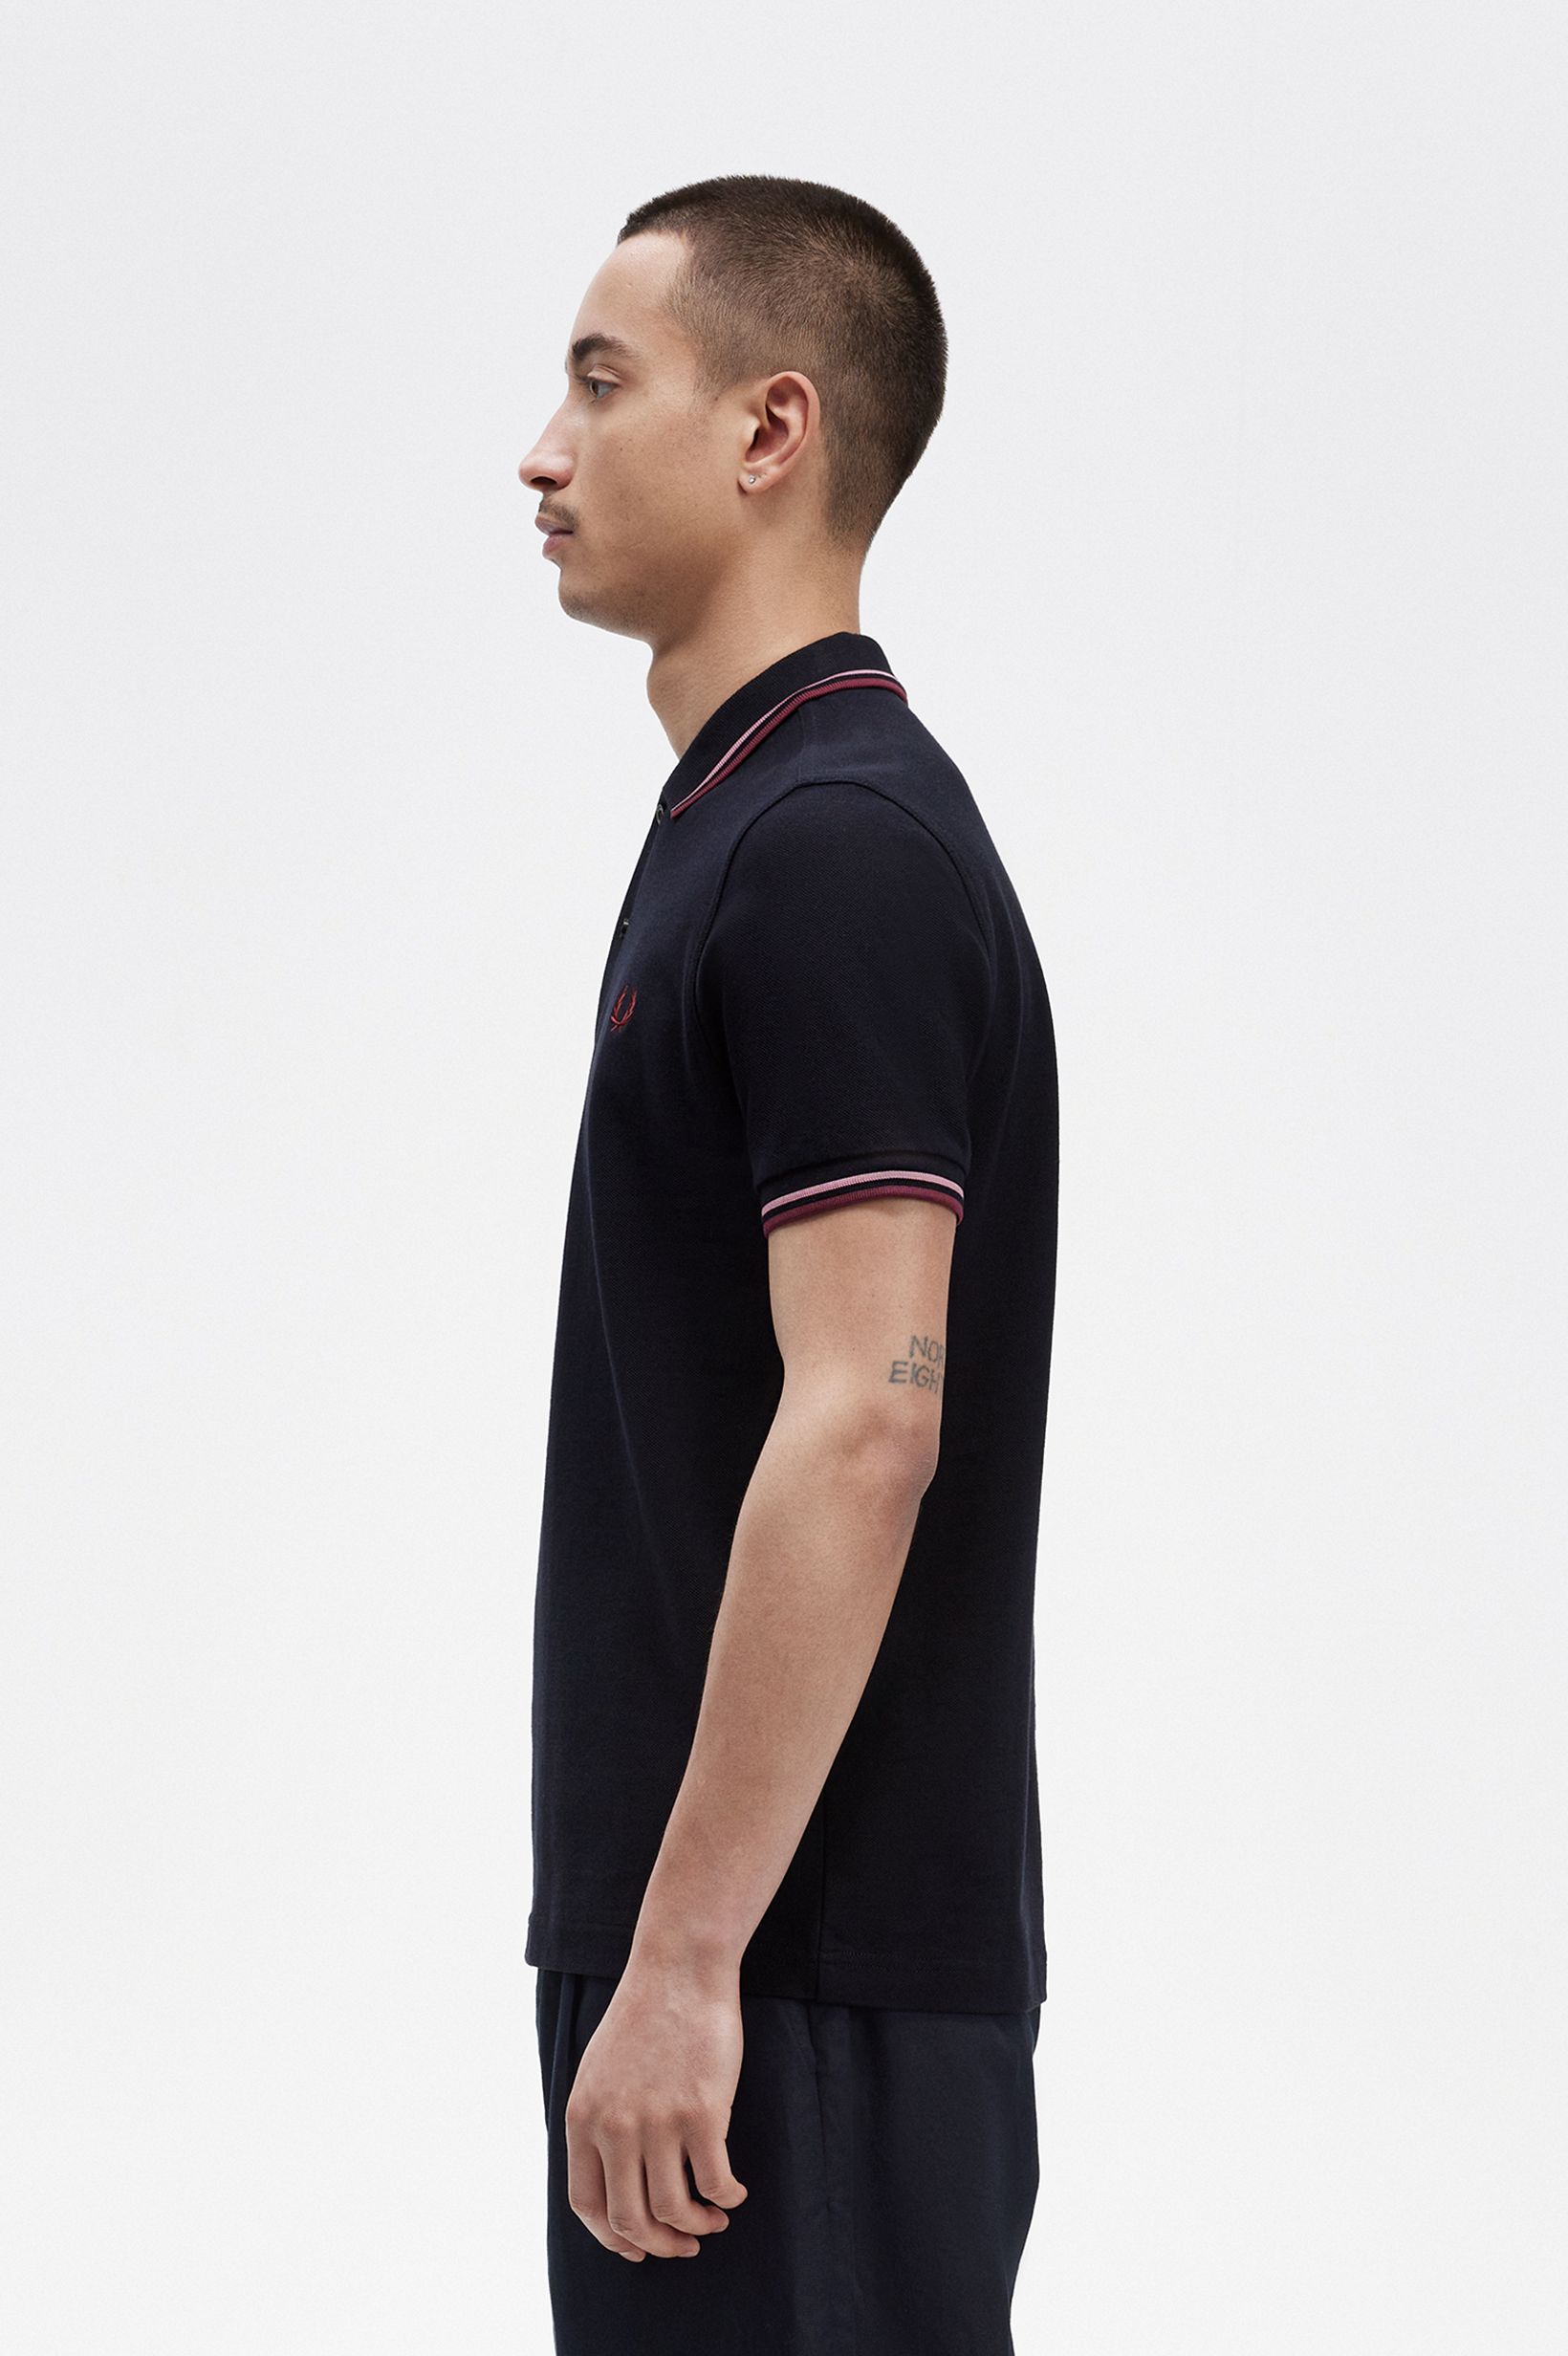 Fred Perry - TWIN TIPPED POLO SHIRT - Navy/Dusty Rose Pink/Oxblood